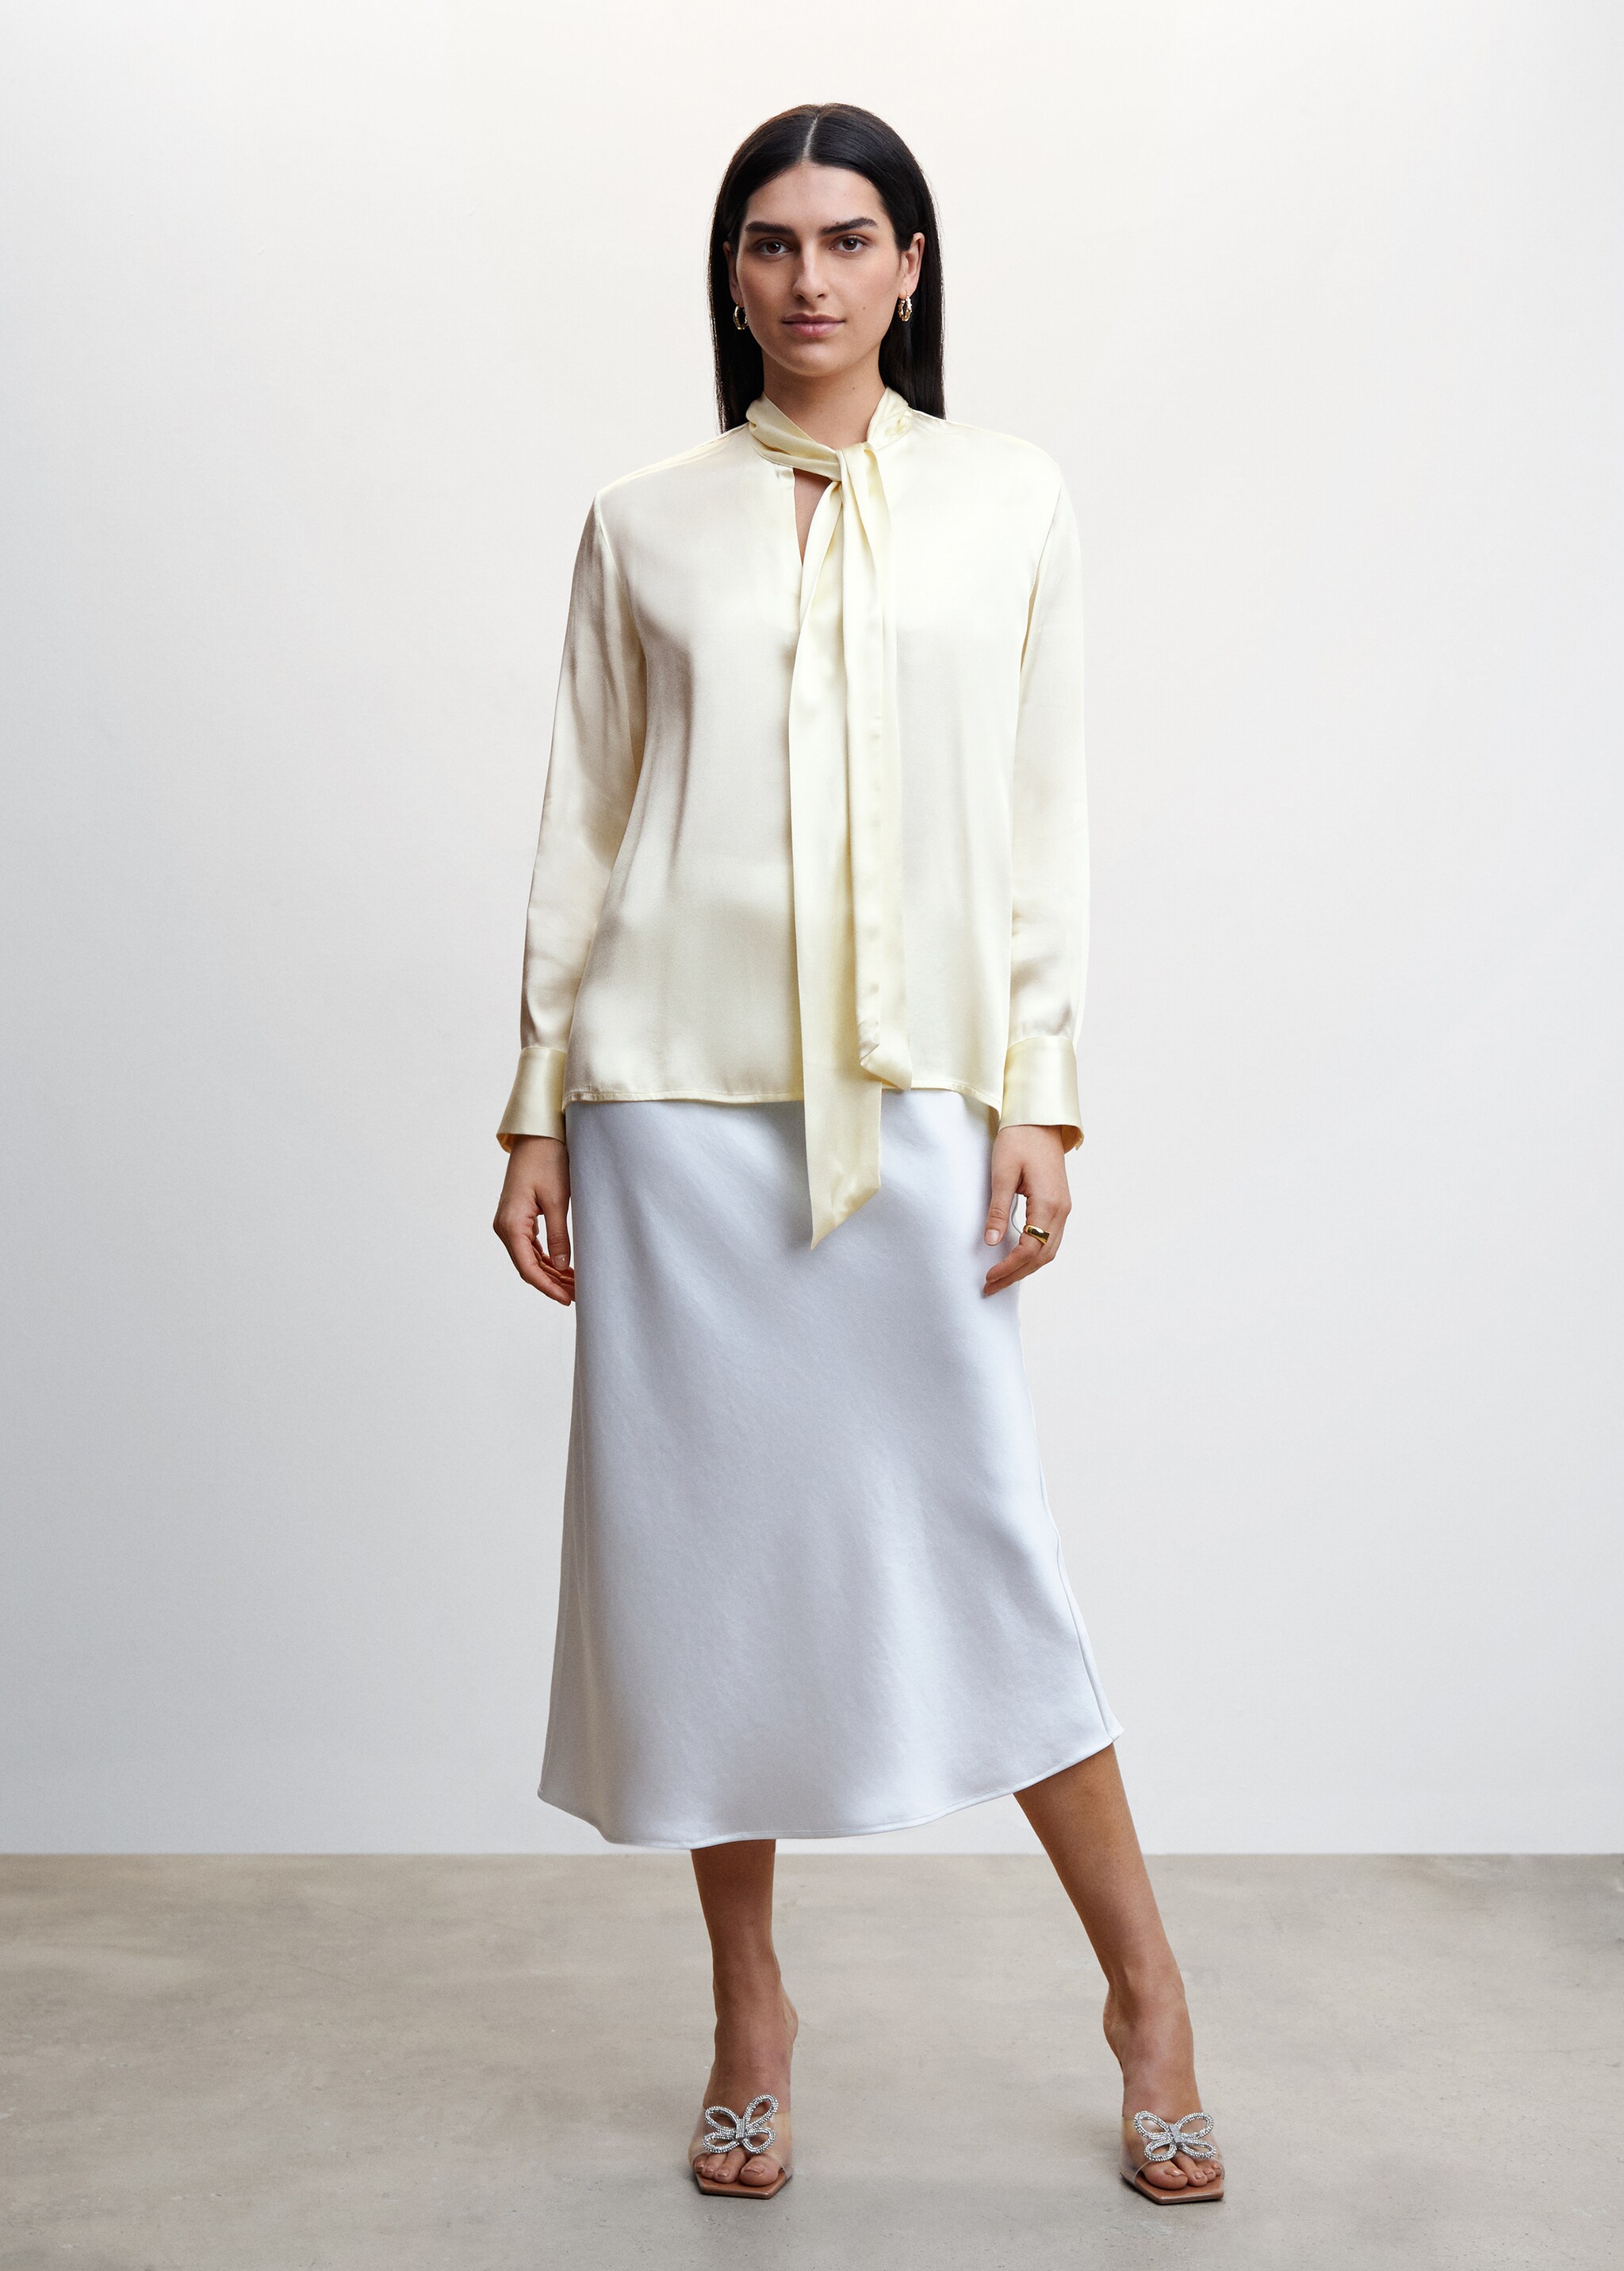 Satin blouse with bow collar - Plan general